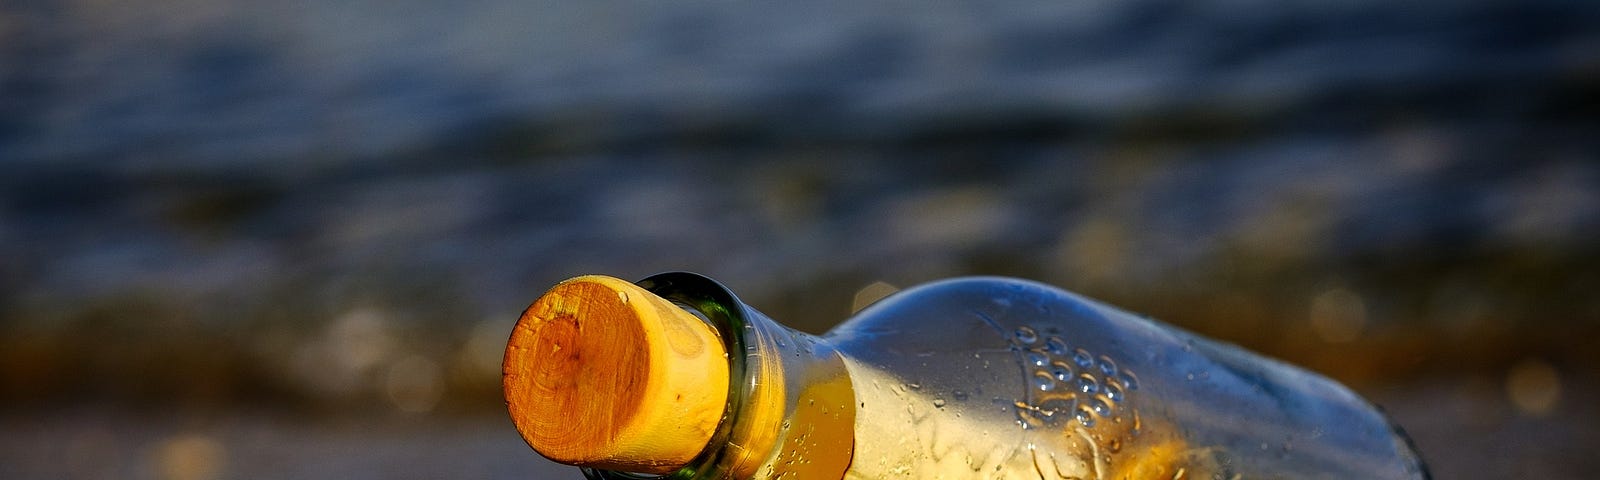 A message in a bottle washed up on a beach